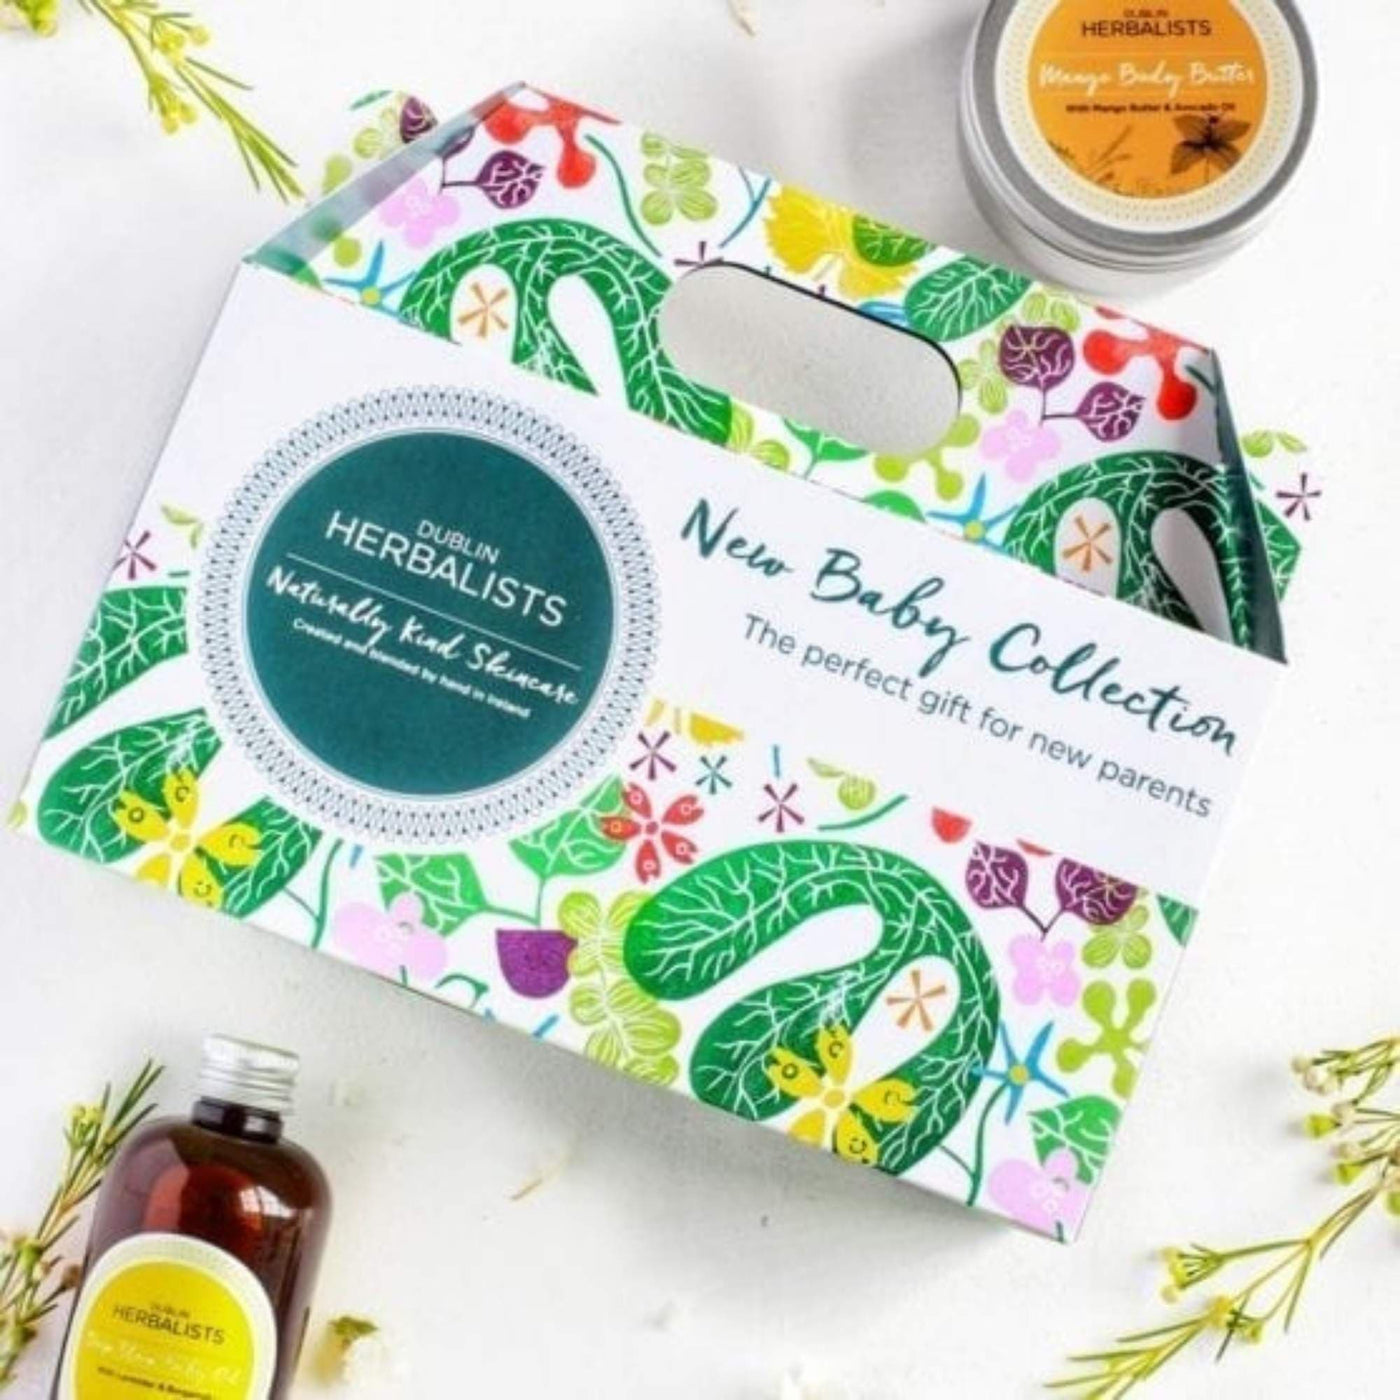 Dublin Herbalists New Baby Collection Gift Set - Dublin Herbalists